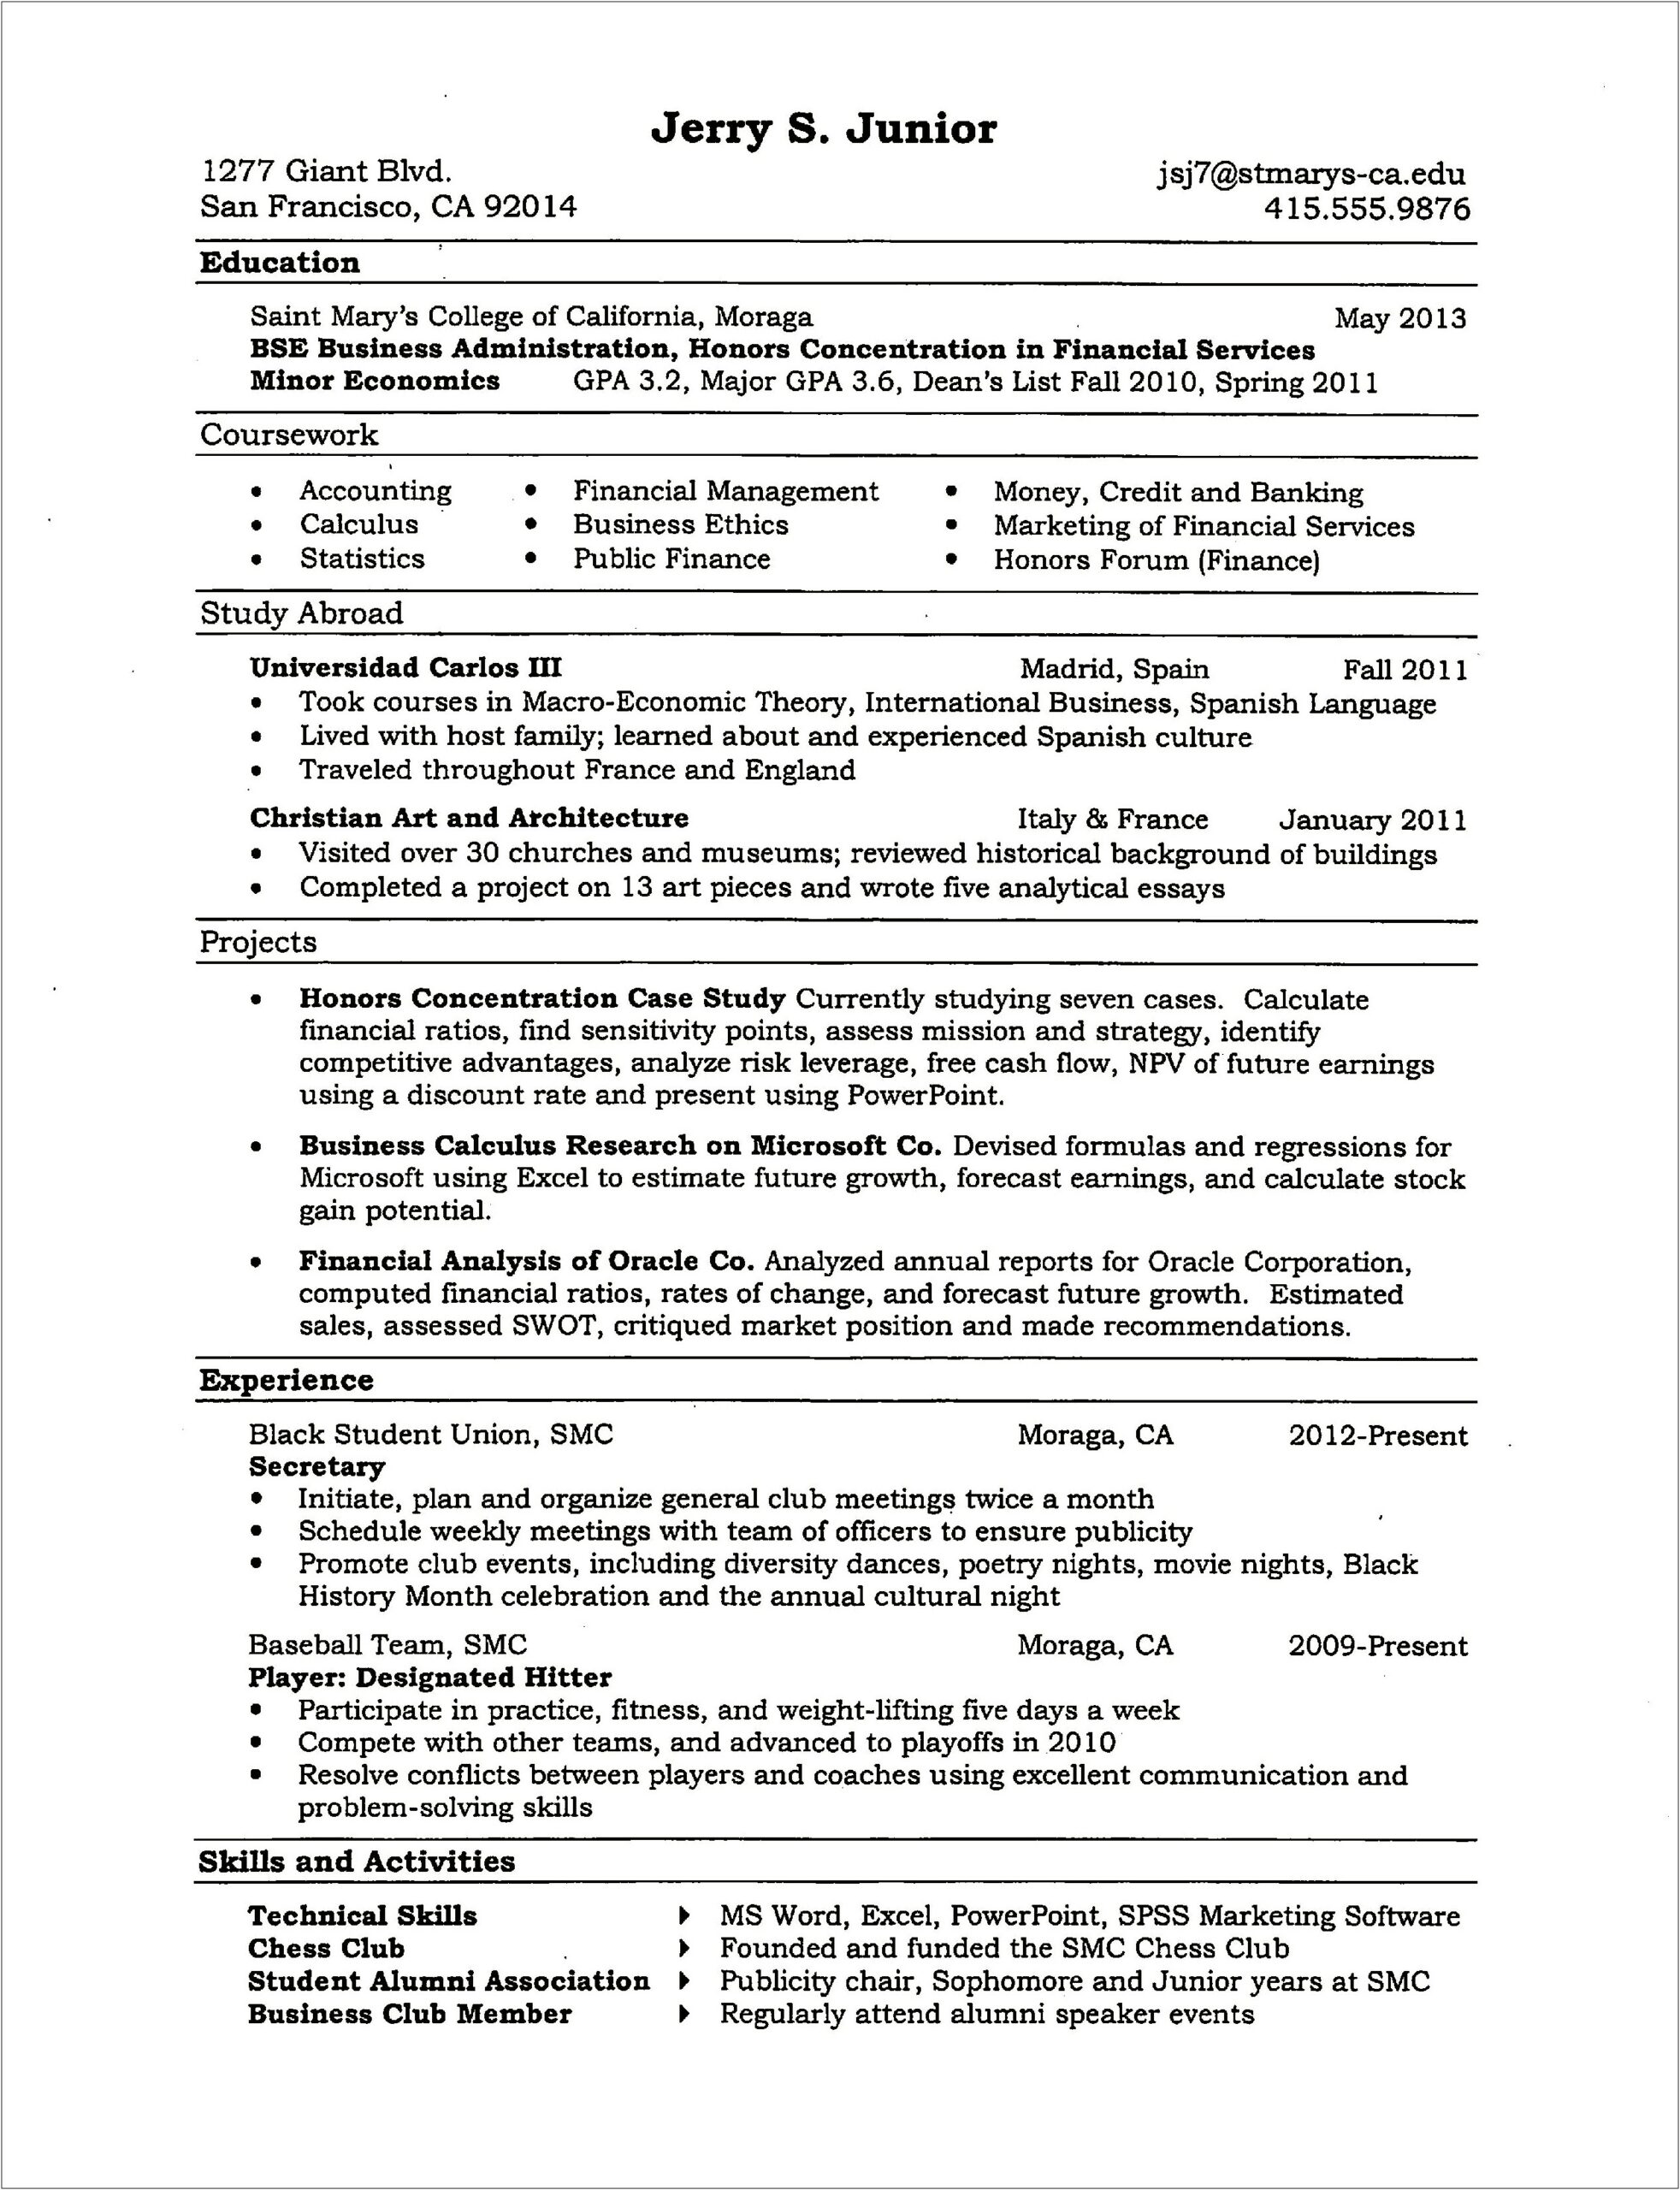 Resume Example With Major And Minor